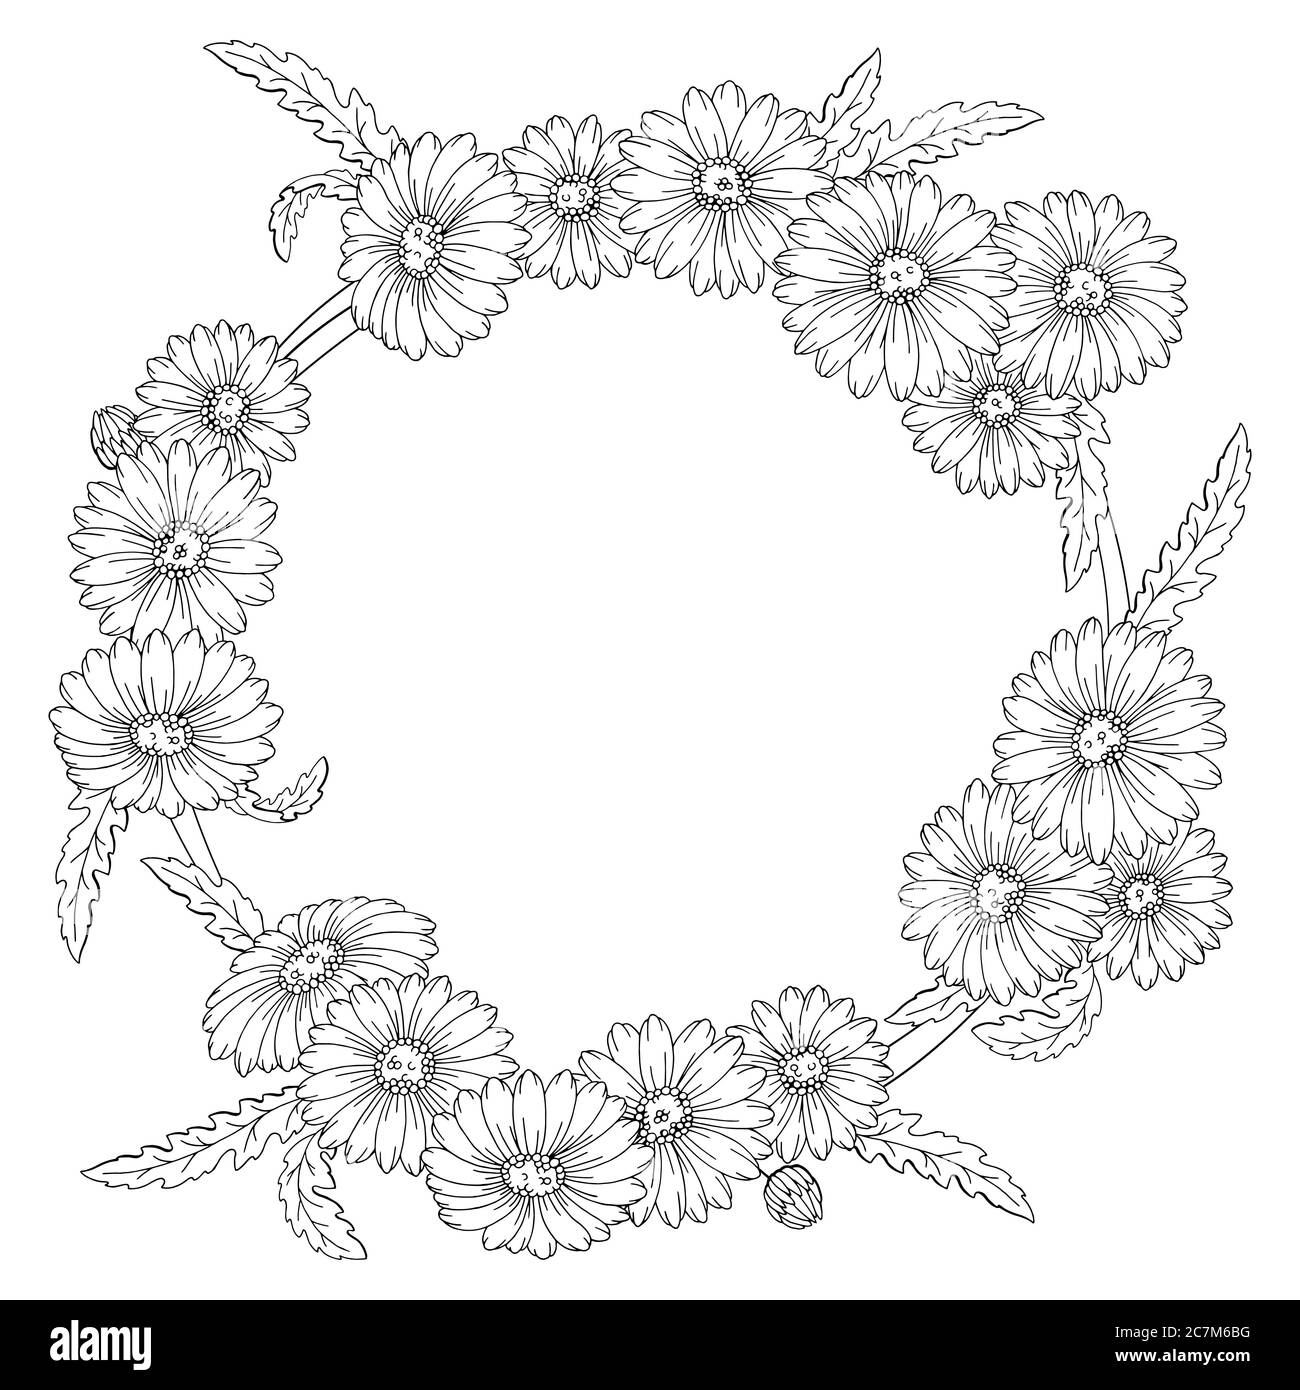 Chamomile flower wreath graphic black white isolated sketch illustration vector Stock Vector